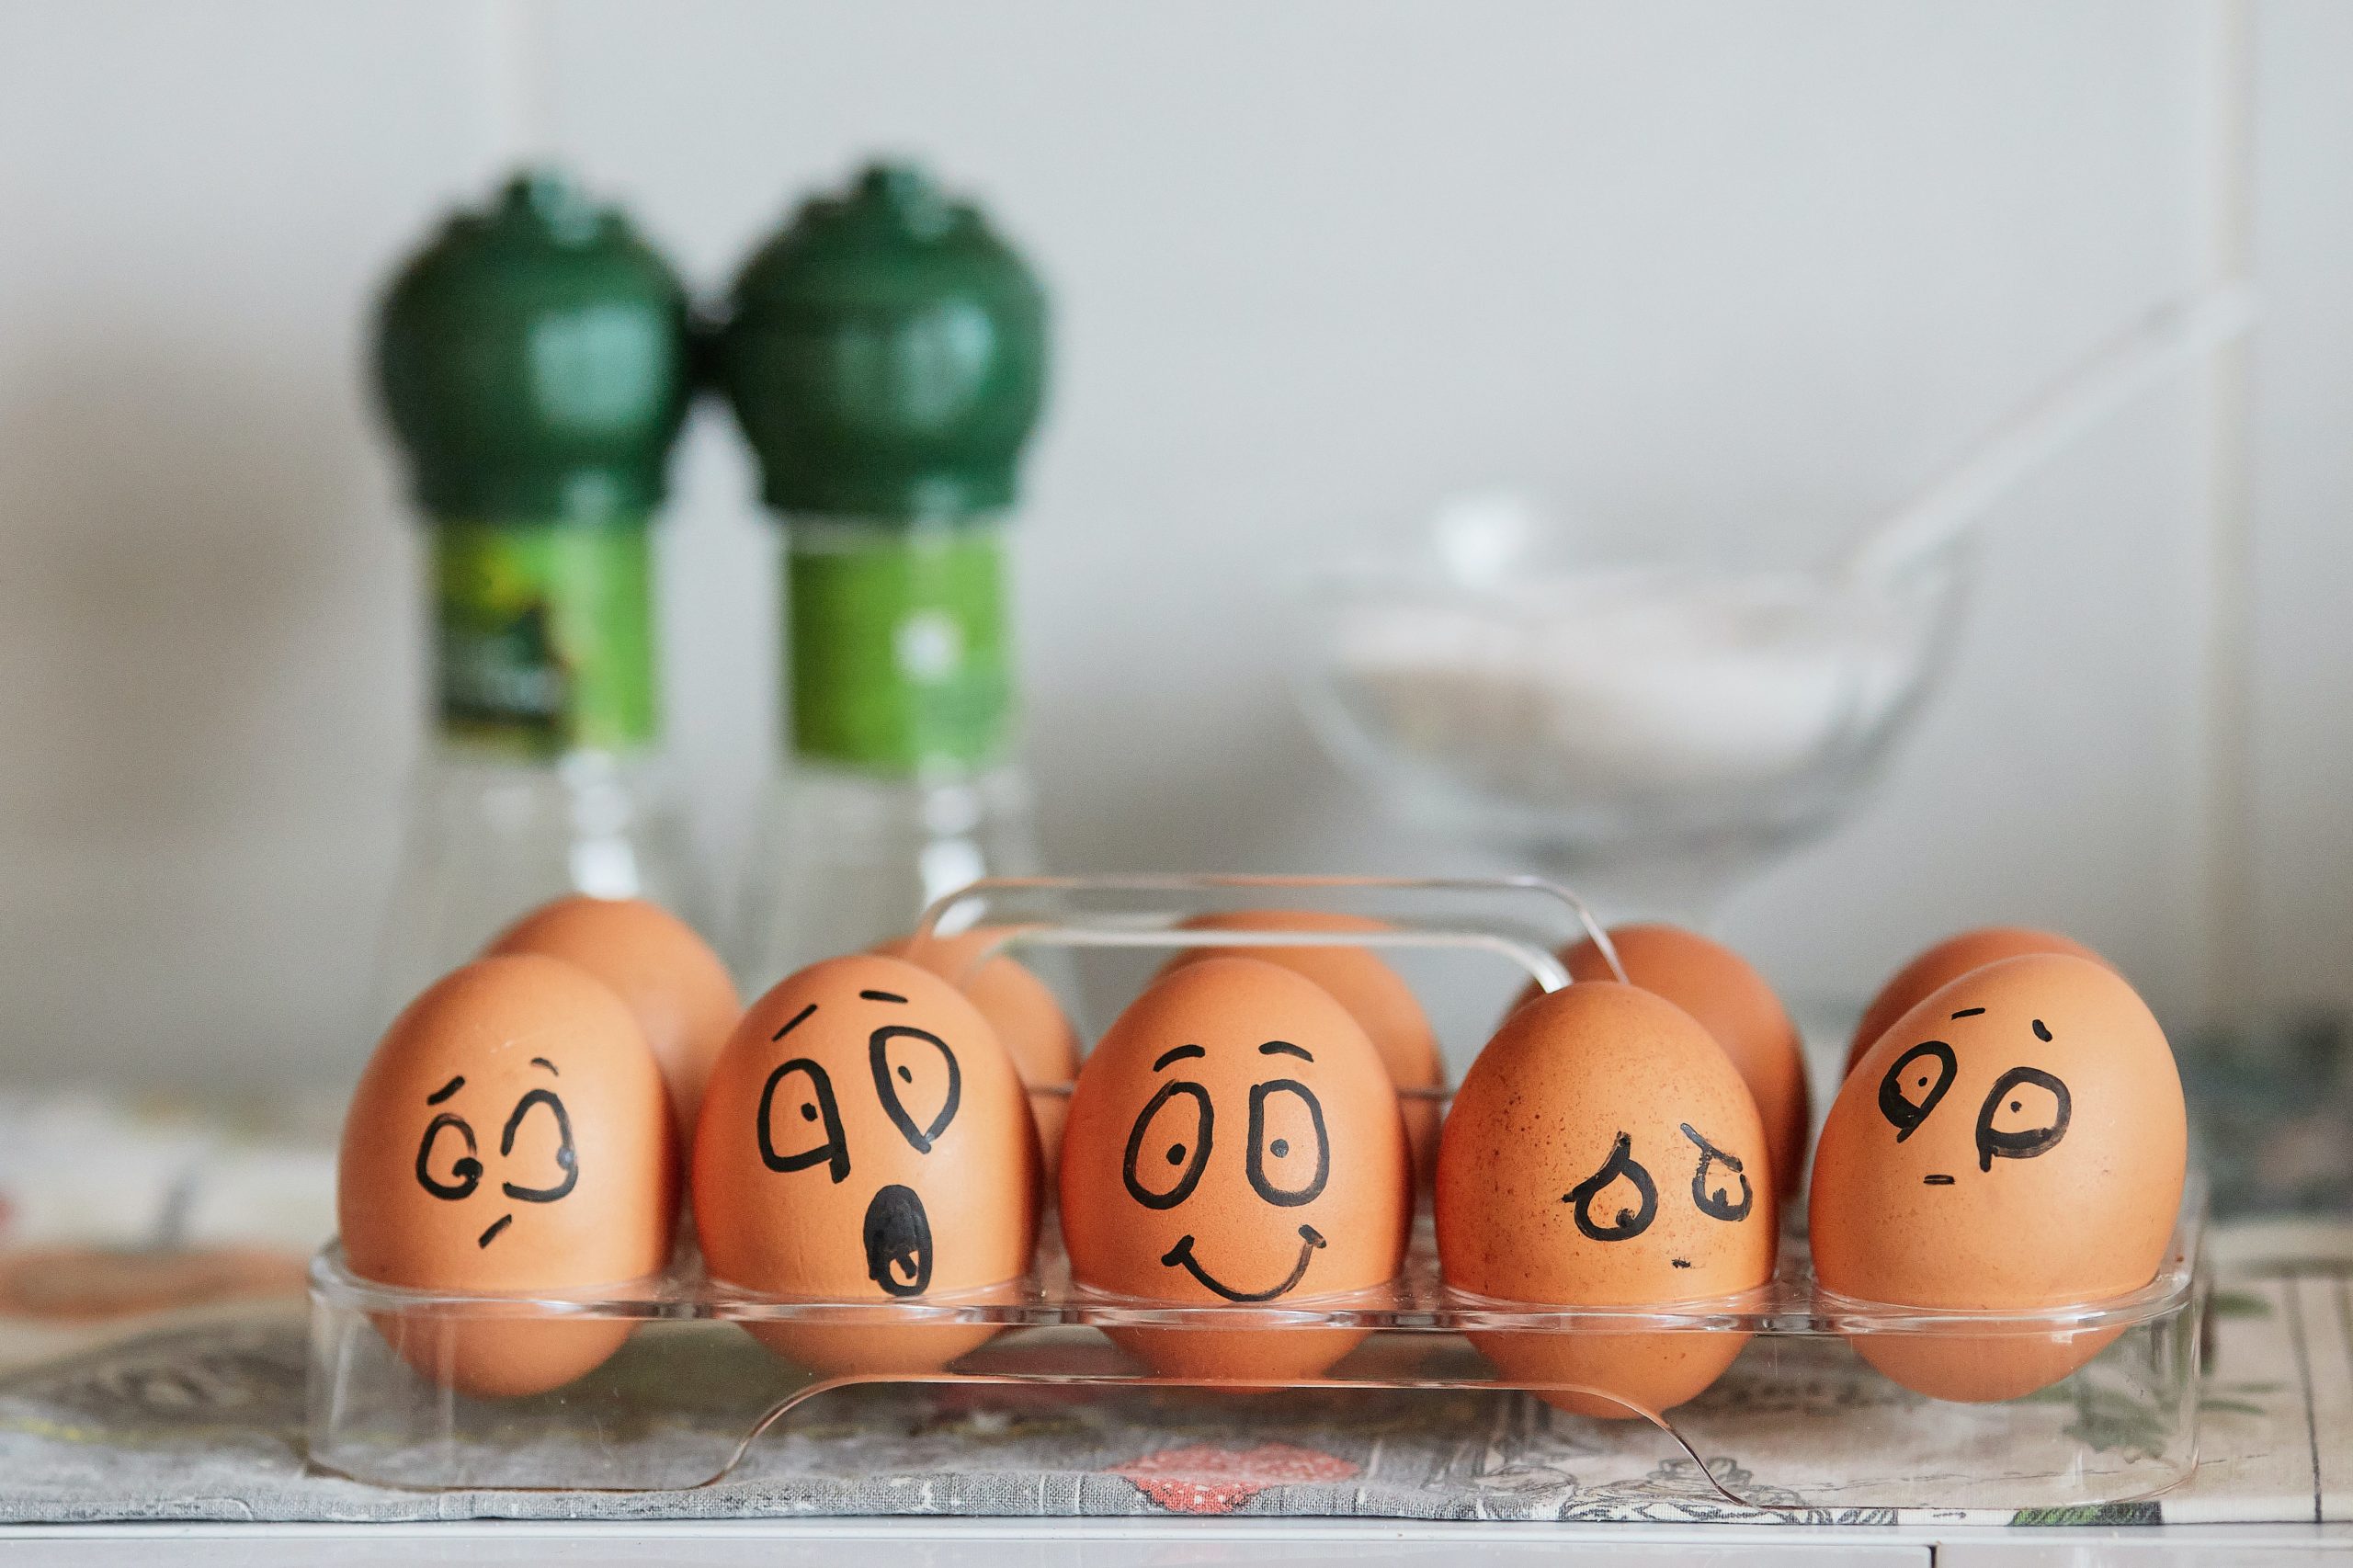 eggs with funny faces drawn on